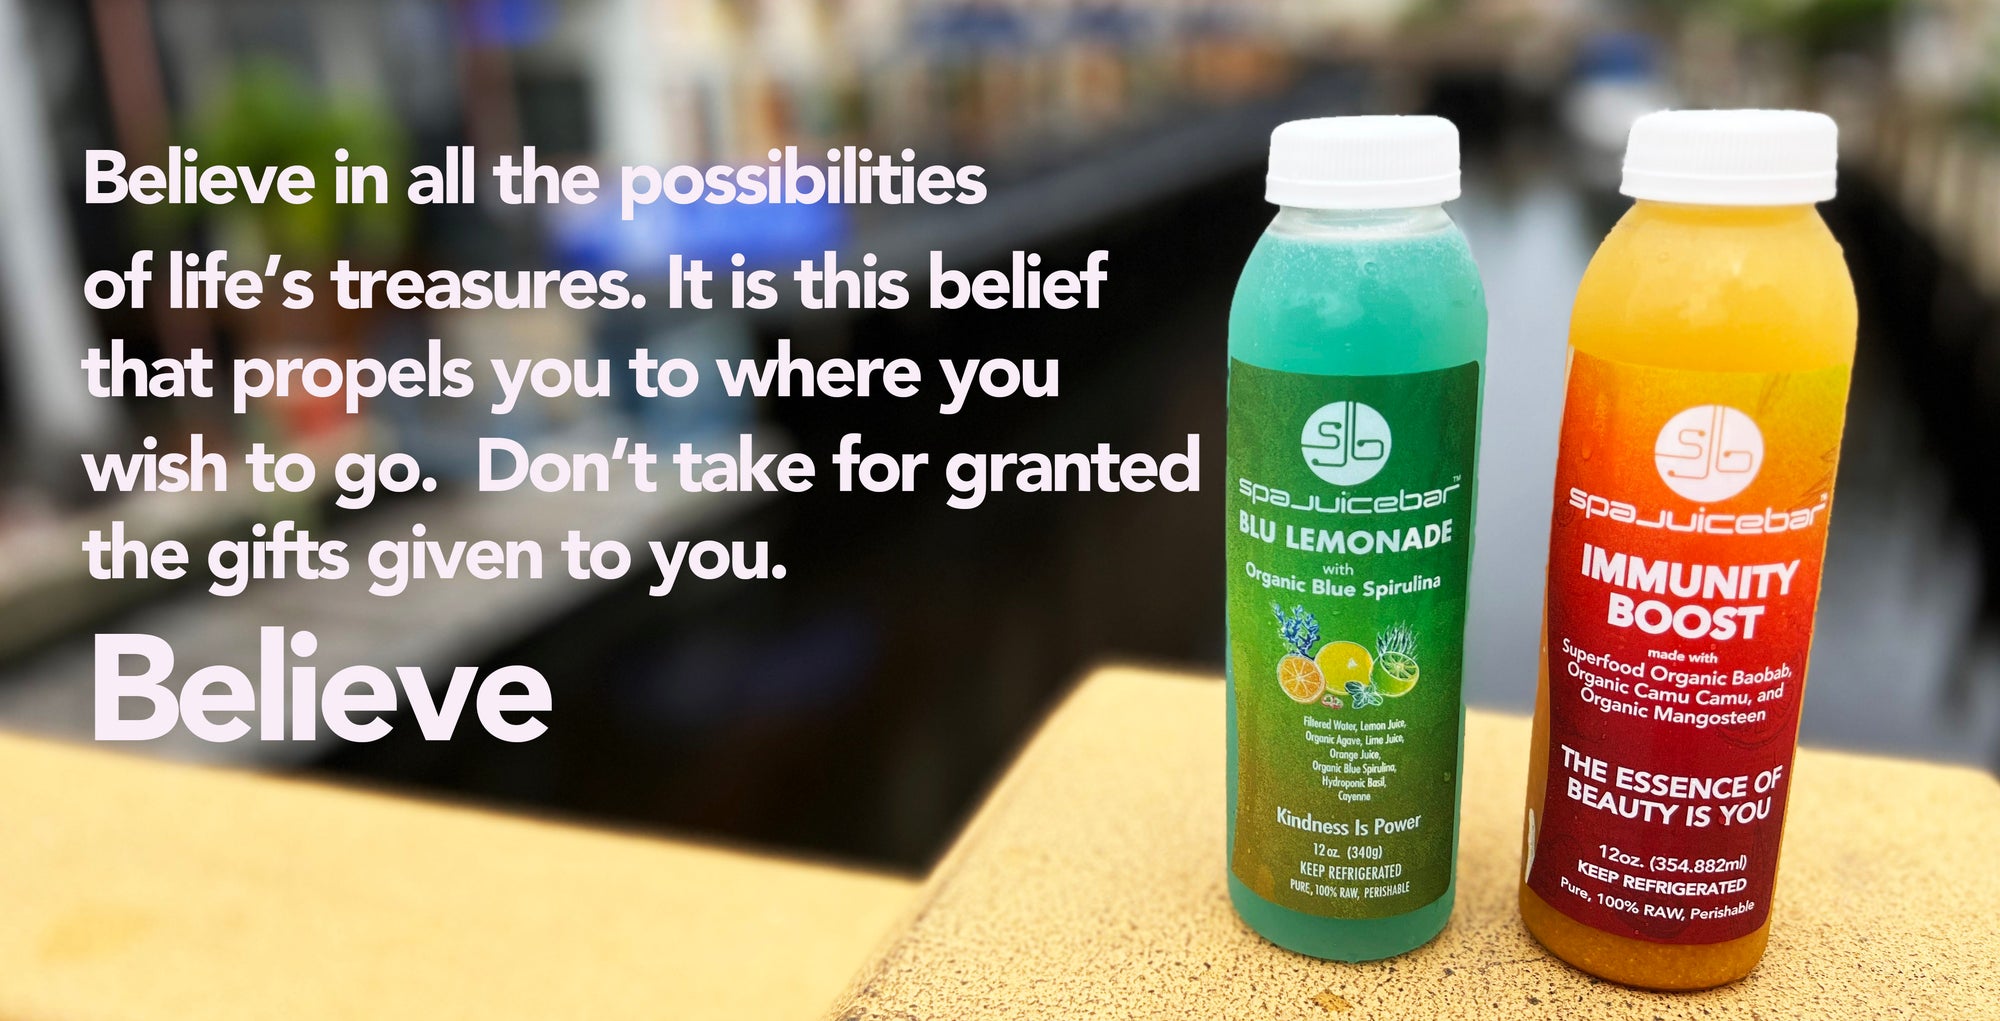 SpaJuiceBar Blu Lemonade and Immunity Boost.  Believe in all the possibilites of life's treasures.  It is this belief that propels you to where you wish to go.  Don't take for granted the gifts given to you.  Believe.